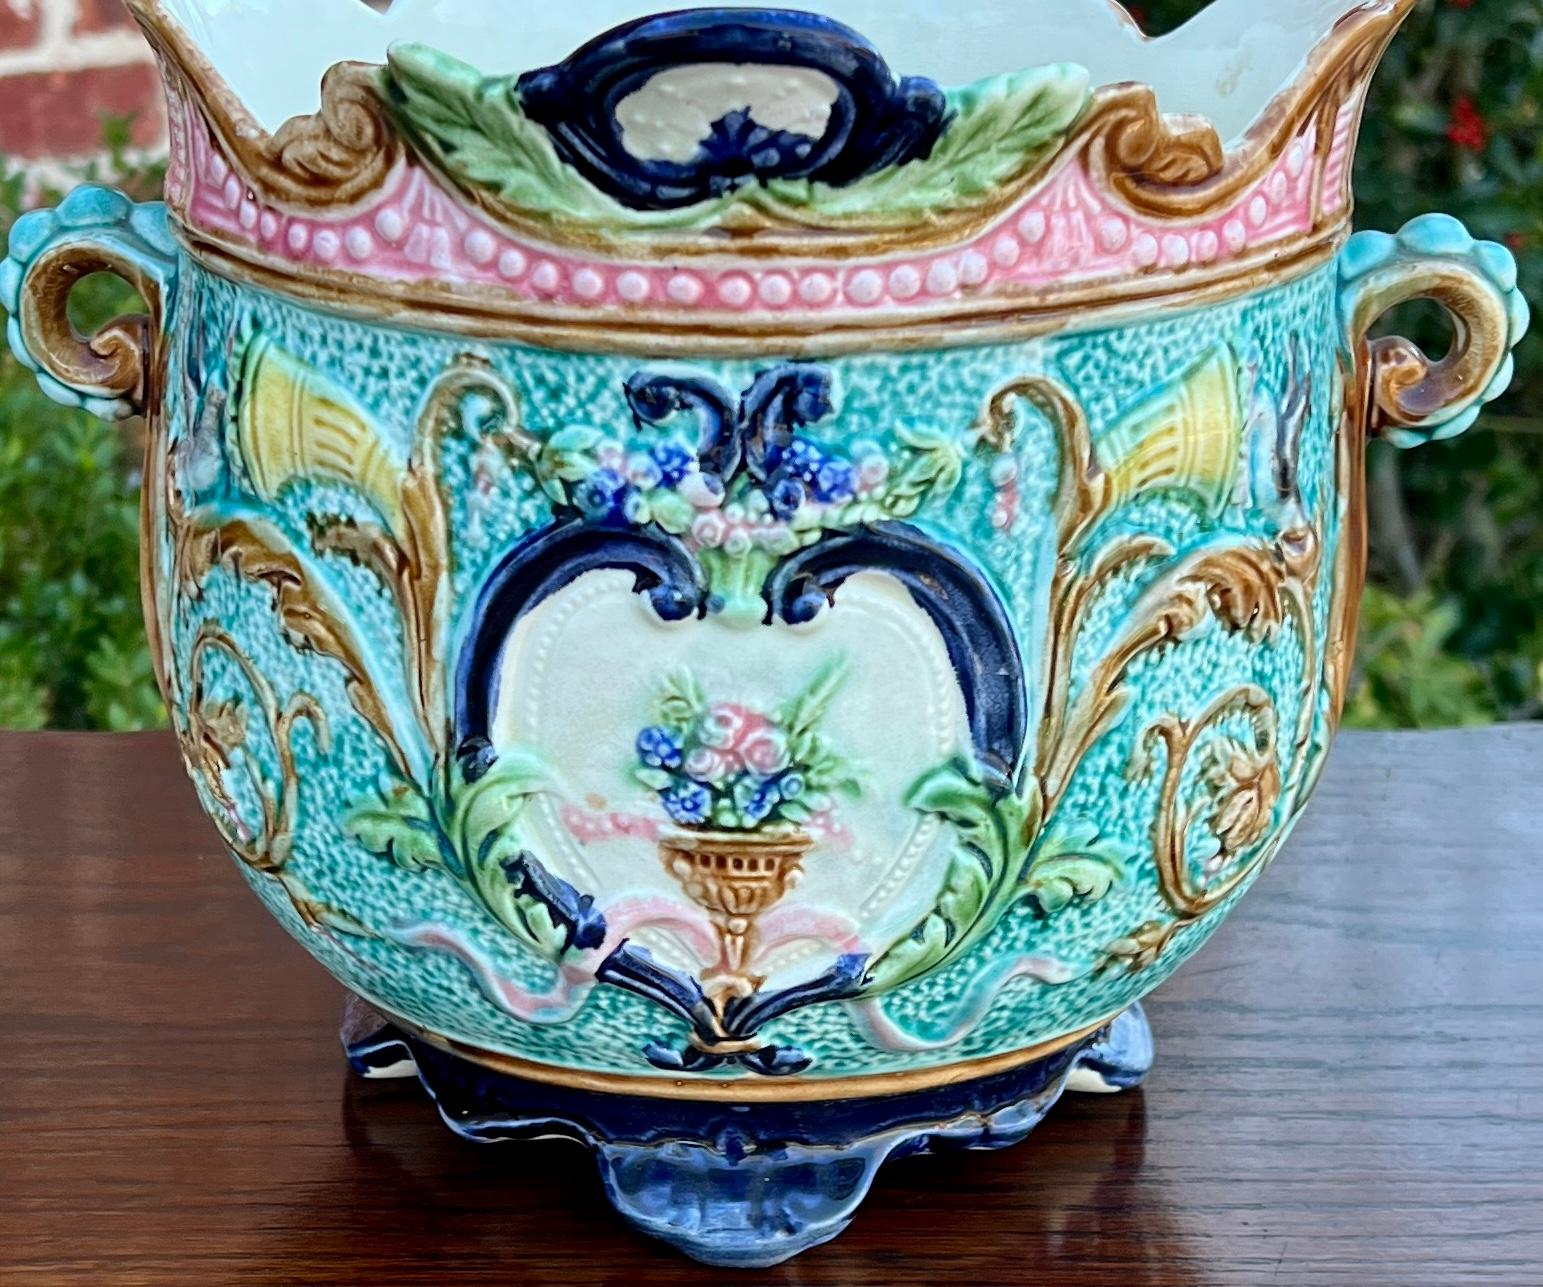 Victorian Antique French Majolica Onnaing Cache Pot Planter Bowl Jardiniere Vase Floral